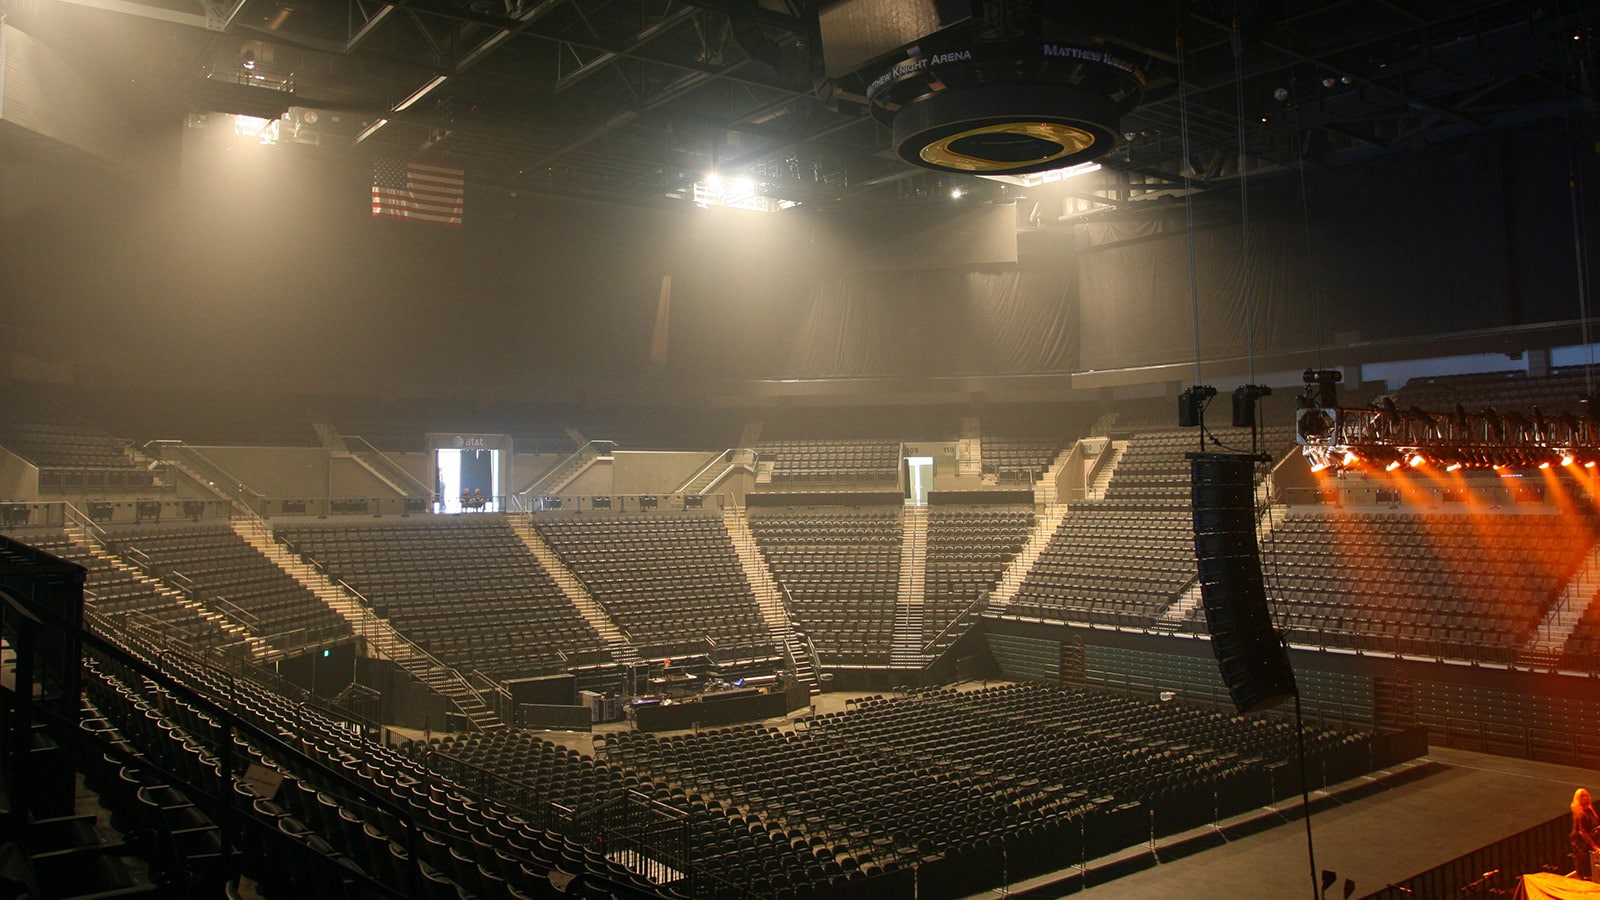 George Relles Sound's New Meyer Sound LYON System Gets Stamp of Approval at Lee Brice Arena Concert